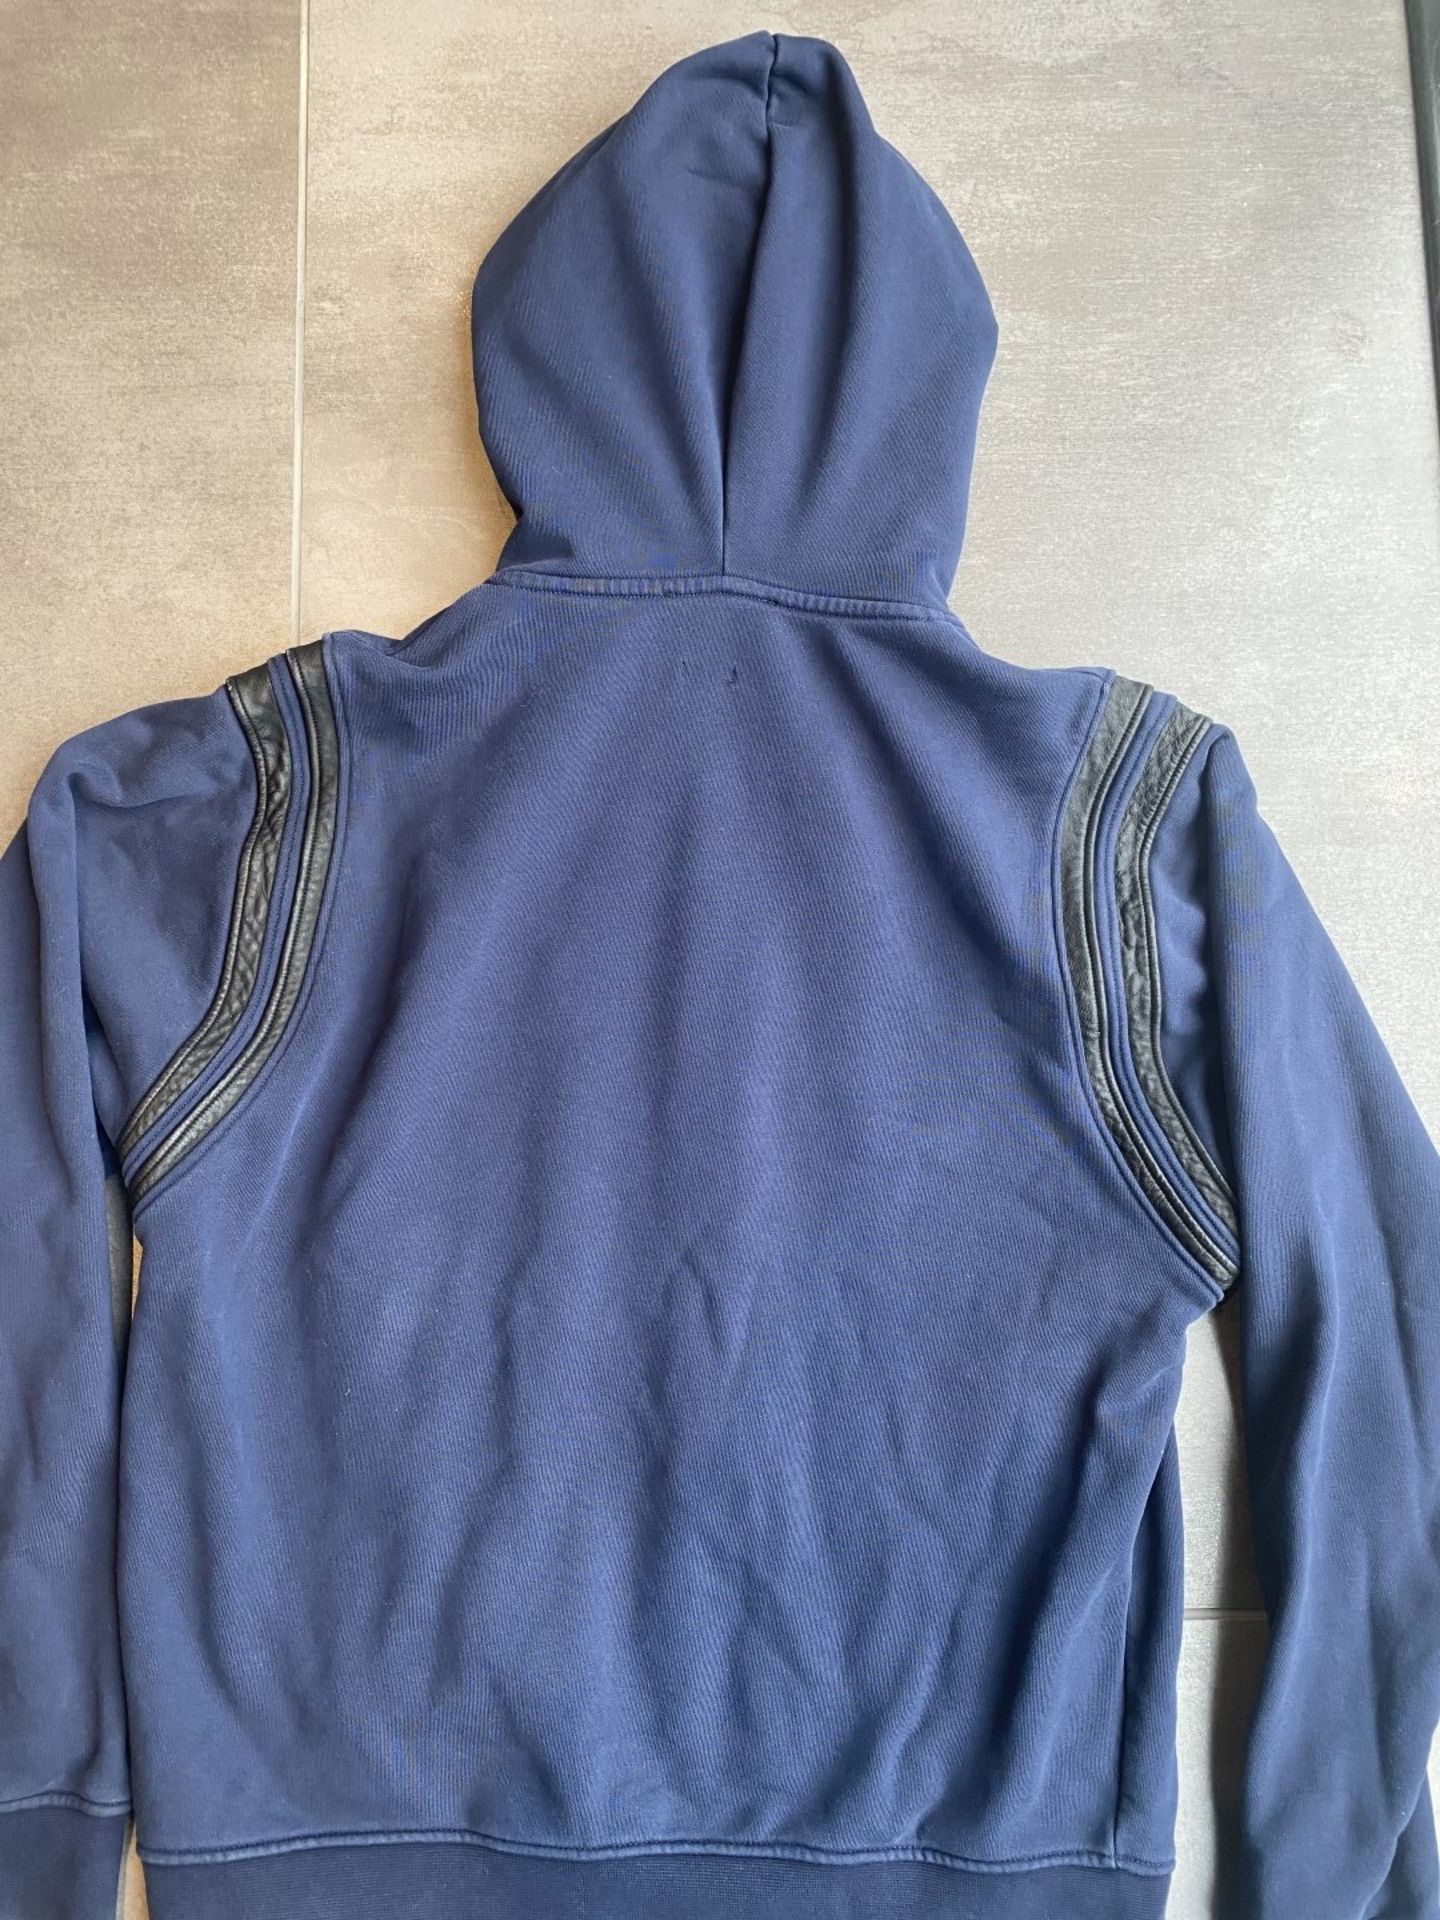 1 x Men's Genuine The Kooples Tracksuit In Navy - Size: Medium - Preowned In Worn - Image 5 of 12